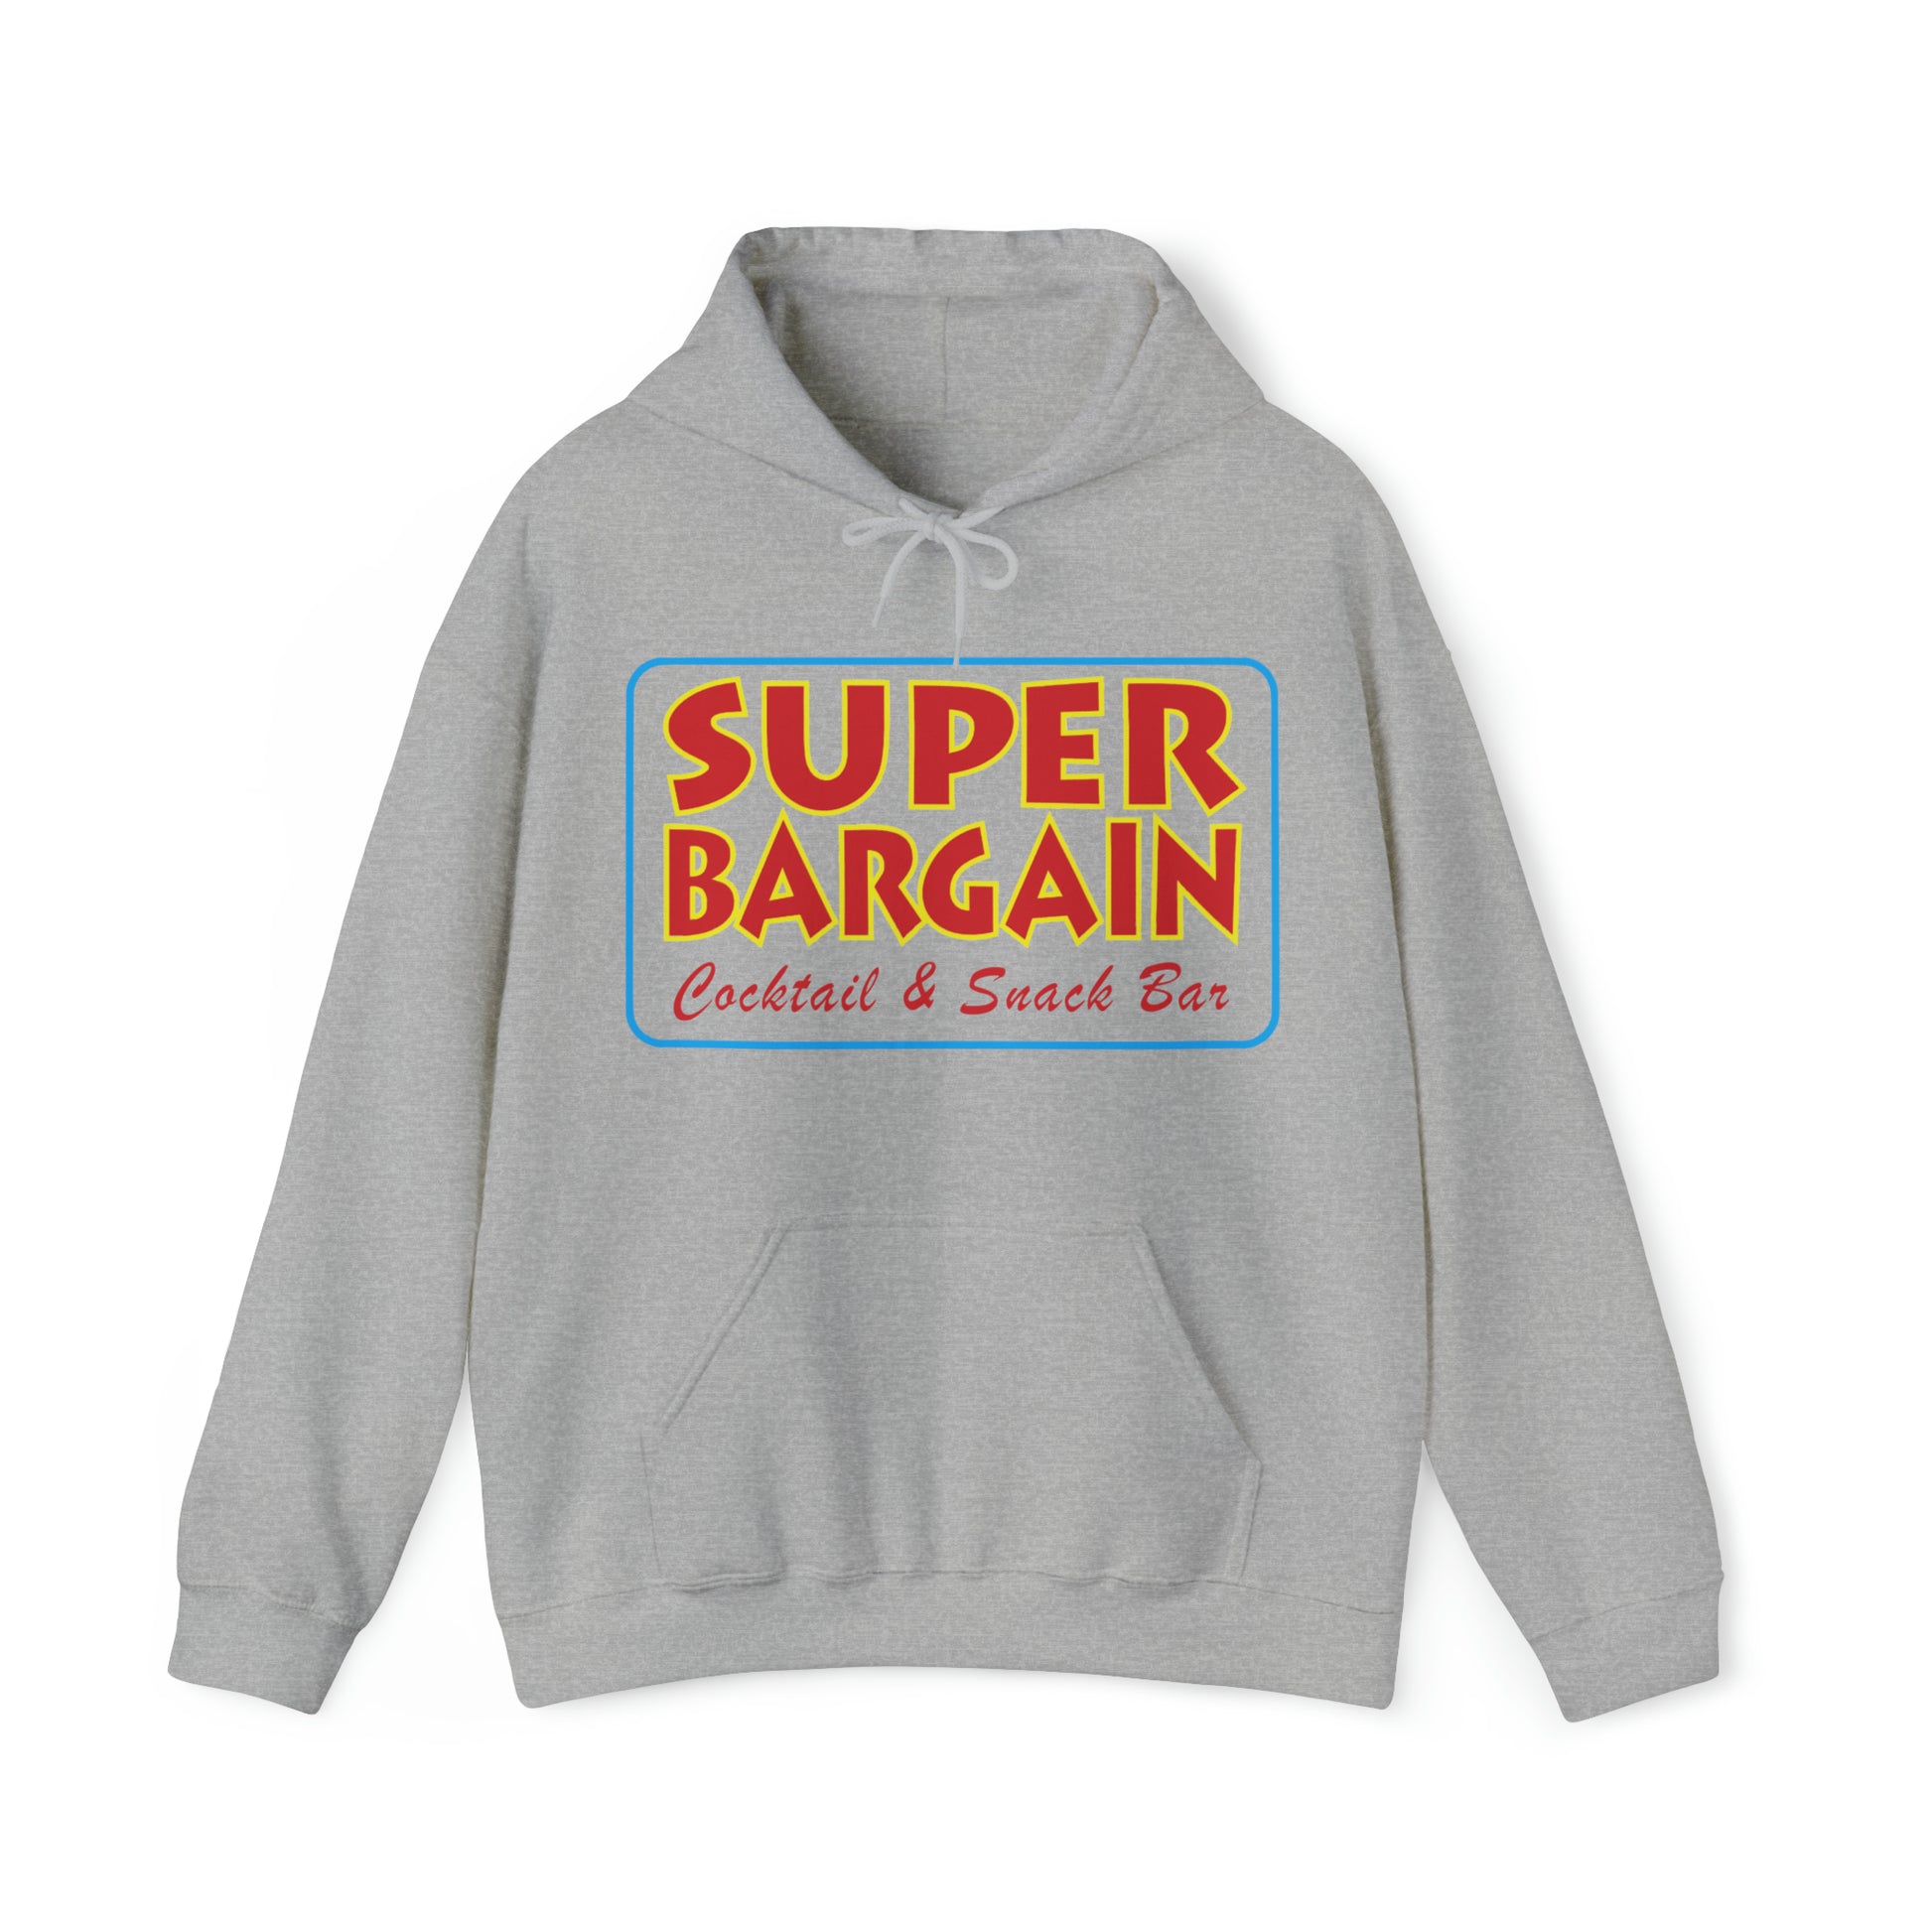 A gray Printify Unisex Heavy Blend™ Hooded Sweatshirt with the words "Toronto SUPER BARGAIN Cocktail & Snack Bar" in bold, colorful lettering on the front. The hoodie has a drawstring and is displayed against a white background.